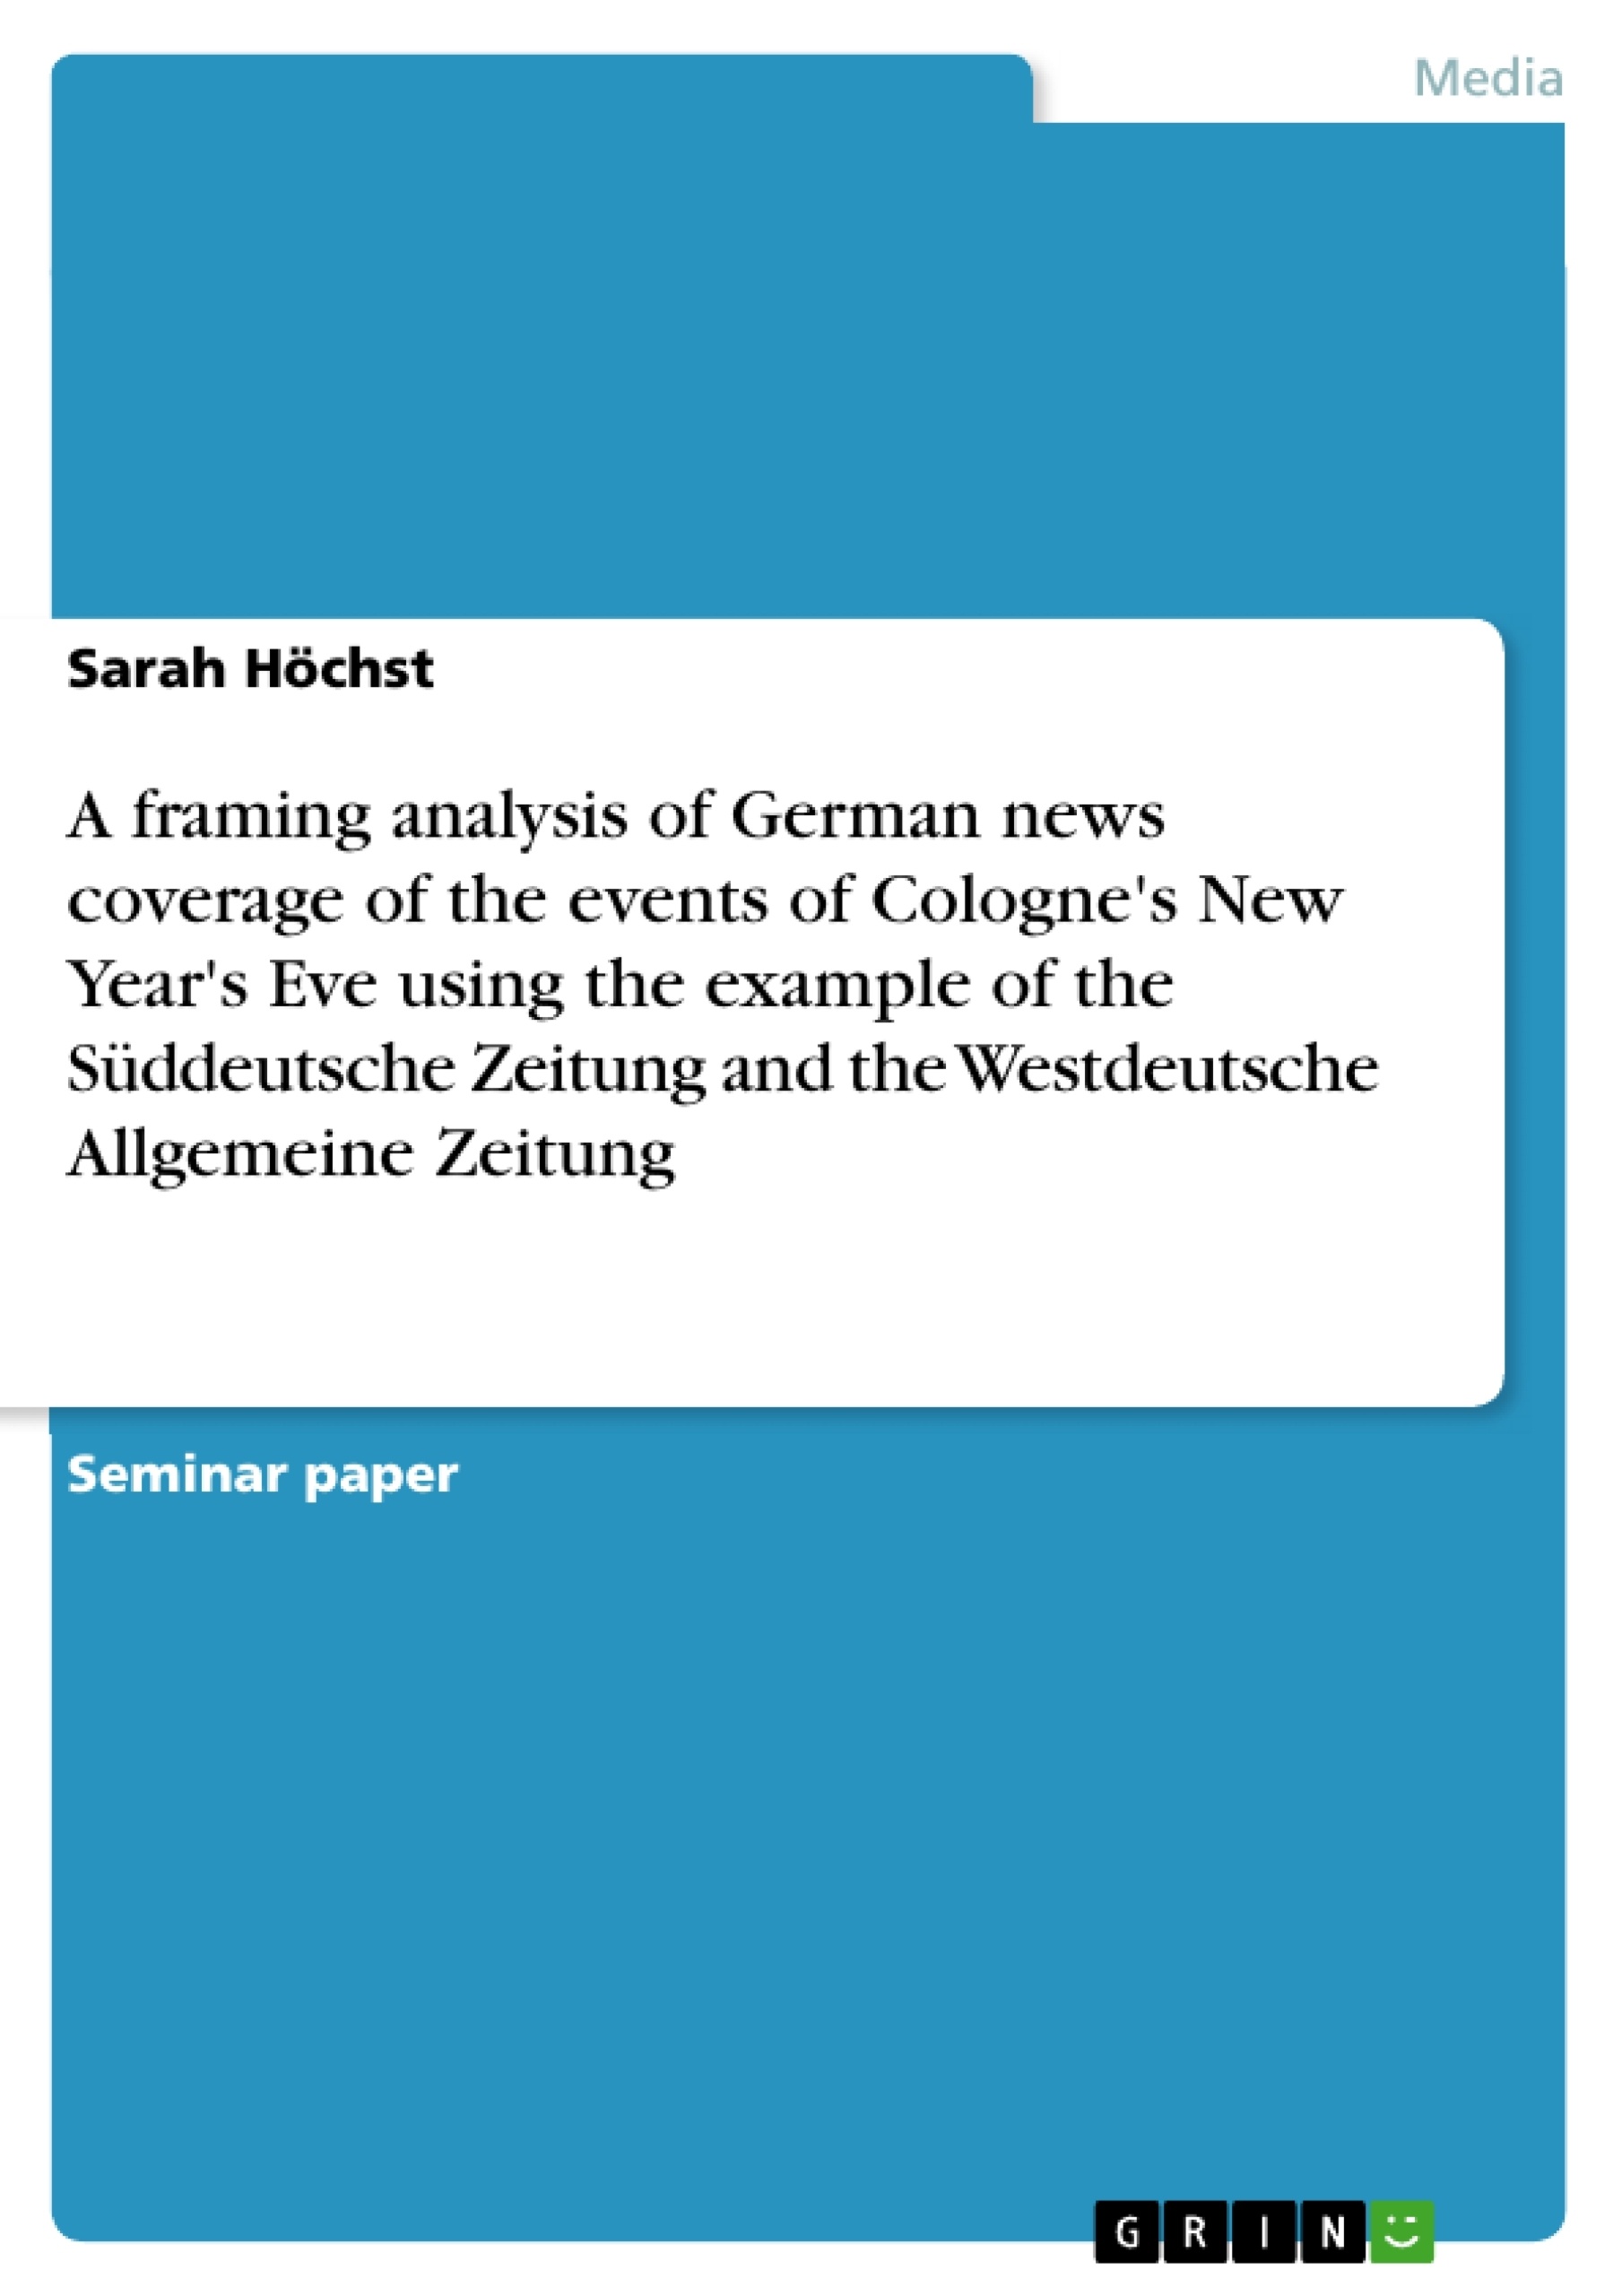 Title: A framing analysis of German news coverage of the events of Cologne's New Year's Eve using the example of the Süddeutsche Zeitung and the Westdeutsche Allgemeine Zeitung